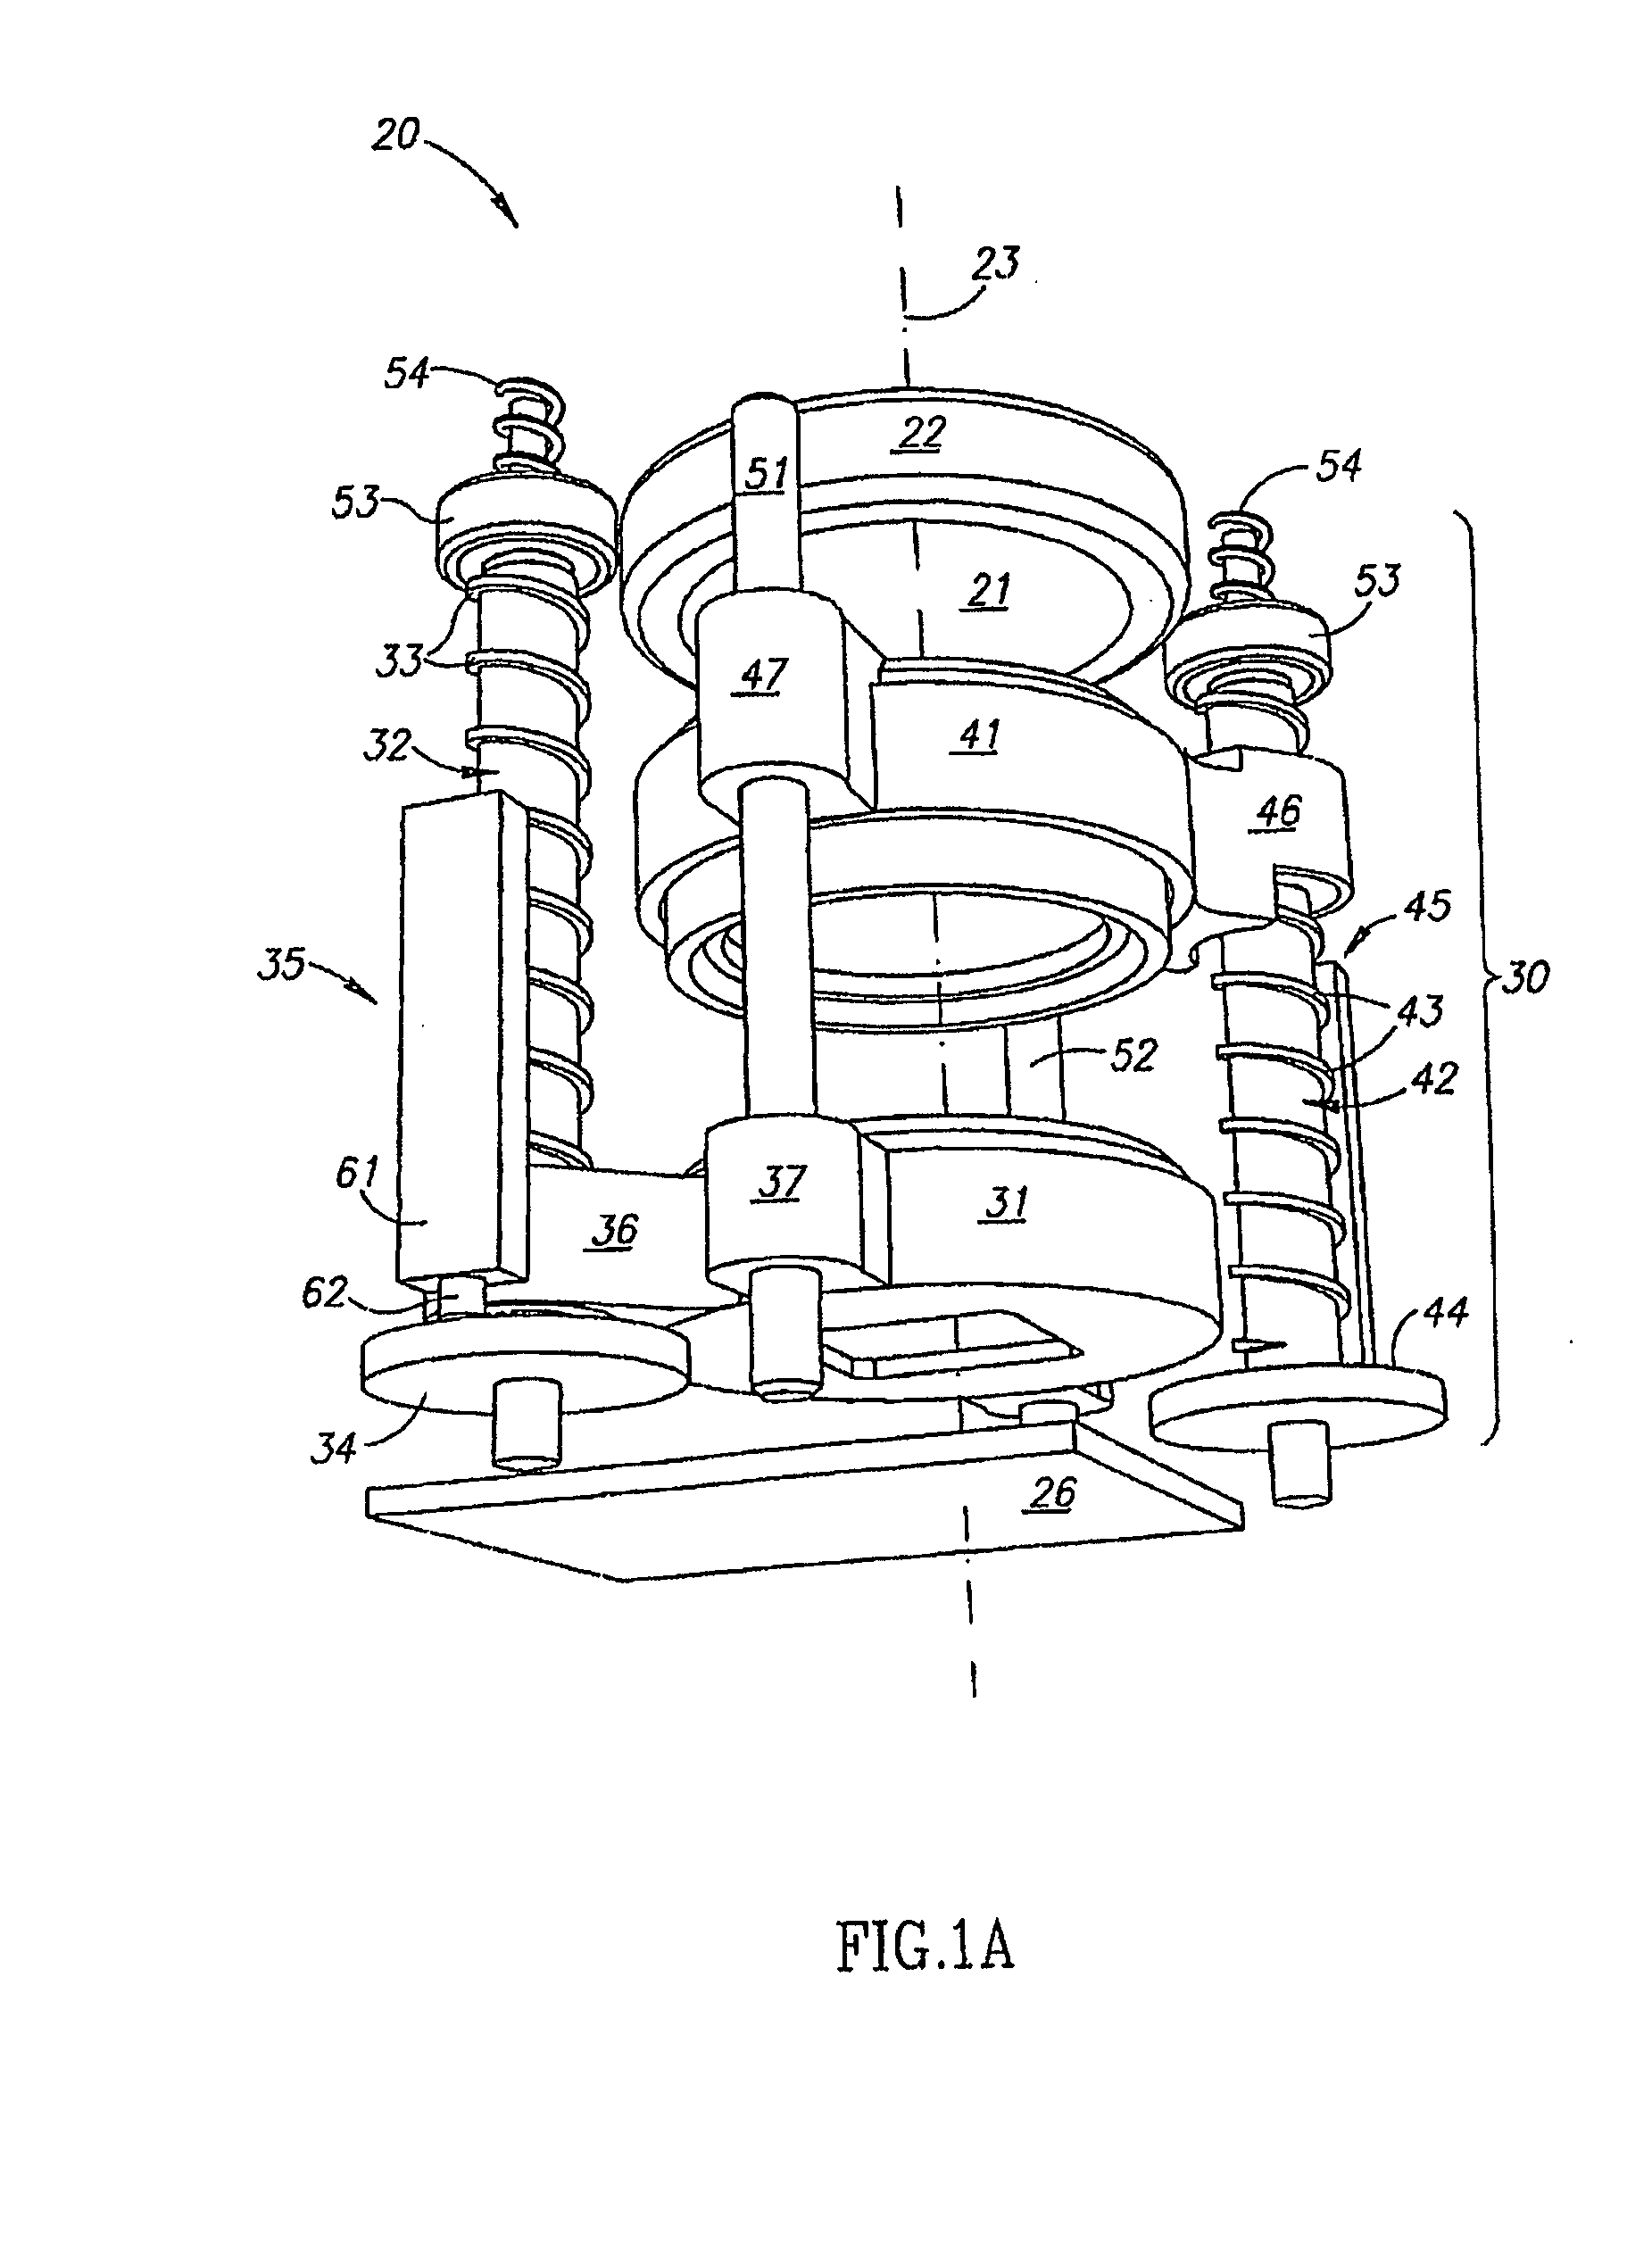 Camera Modules With Lens Drive Device